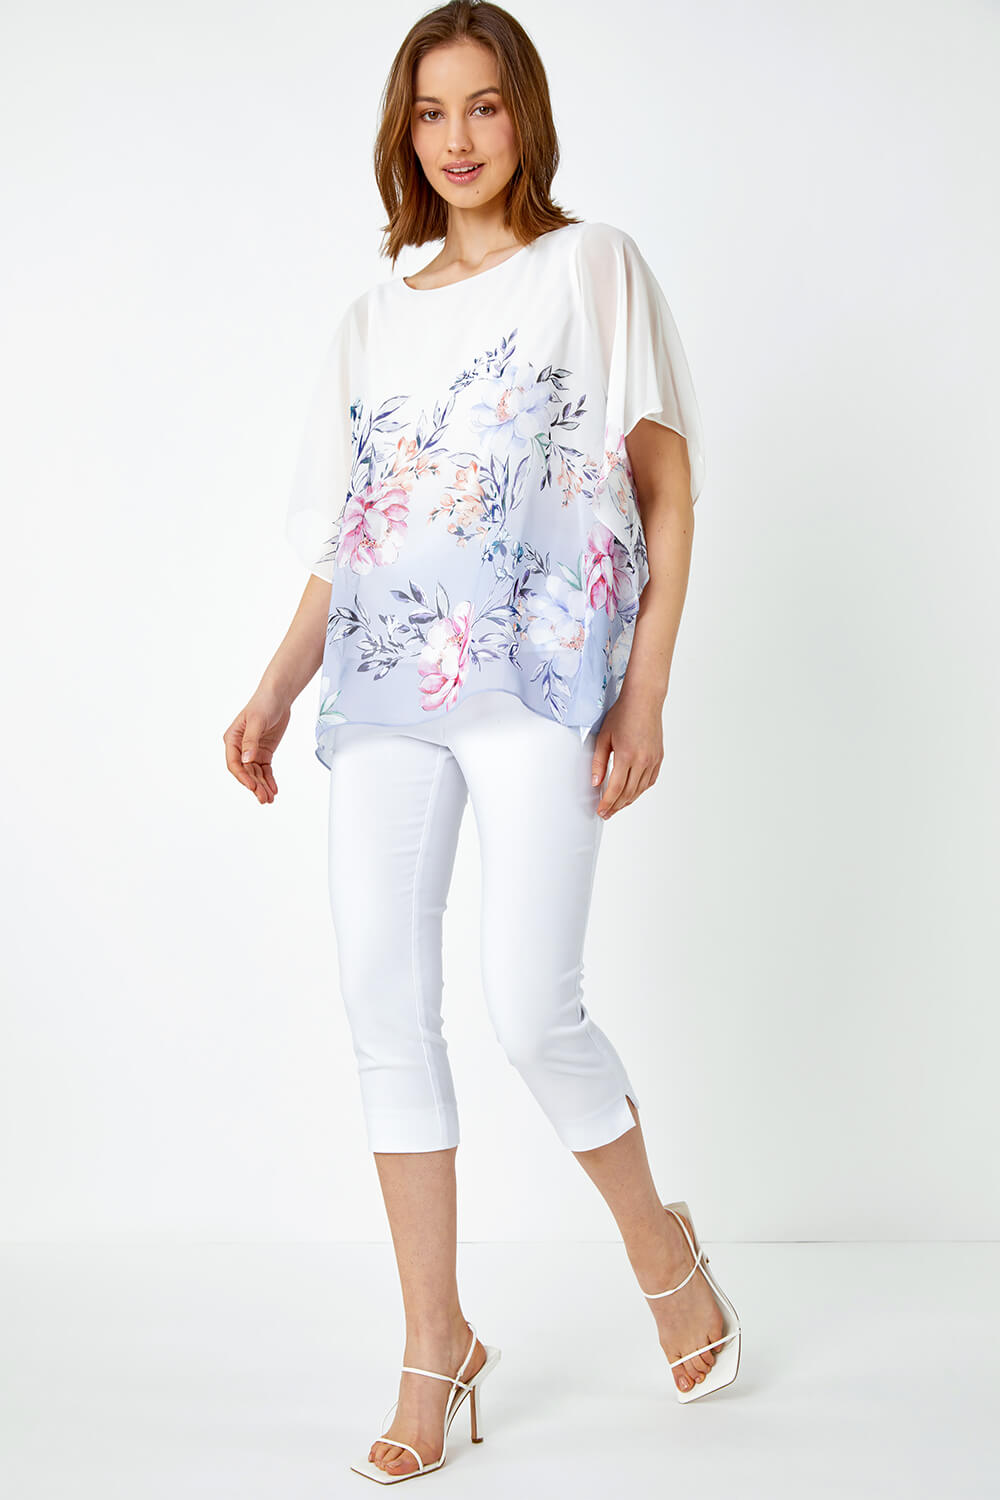 Lavender Floral Print Chiffon Overlay Top, Image 2 of 5